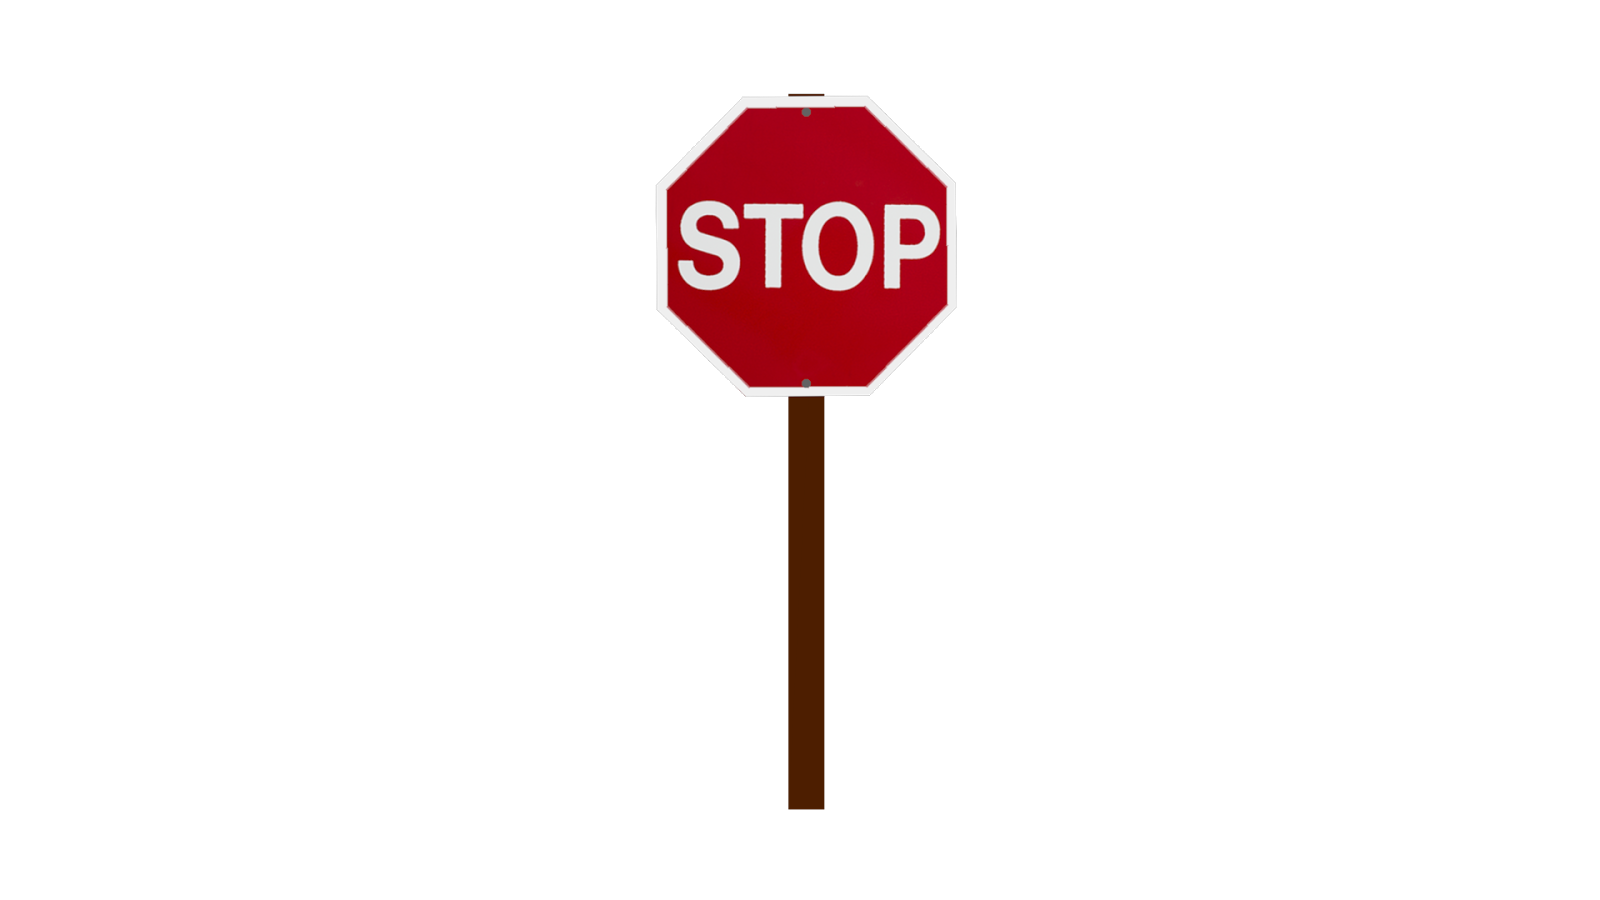 Sign stop PNG images Download 